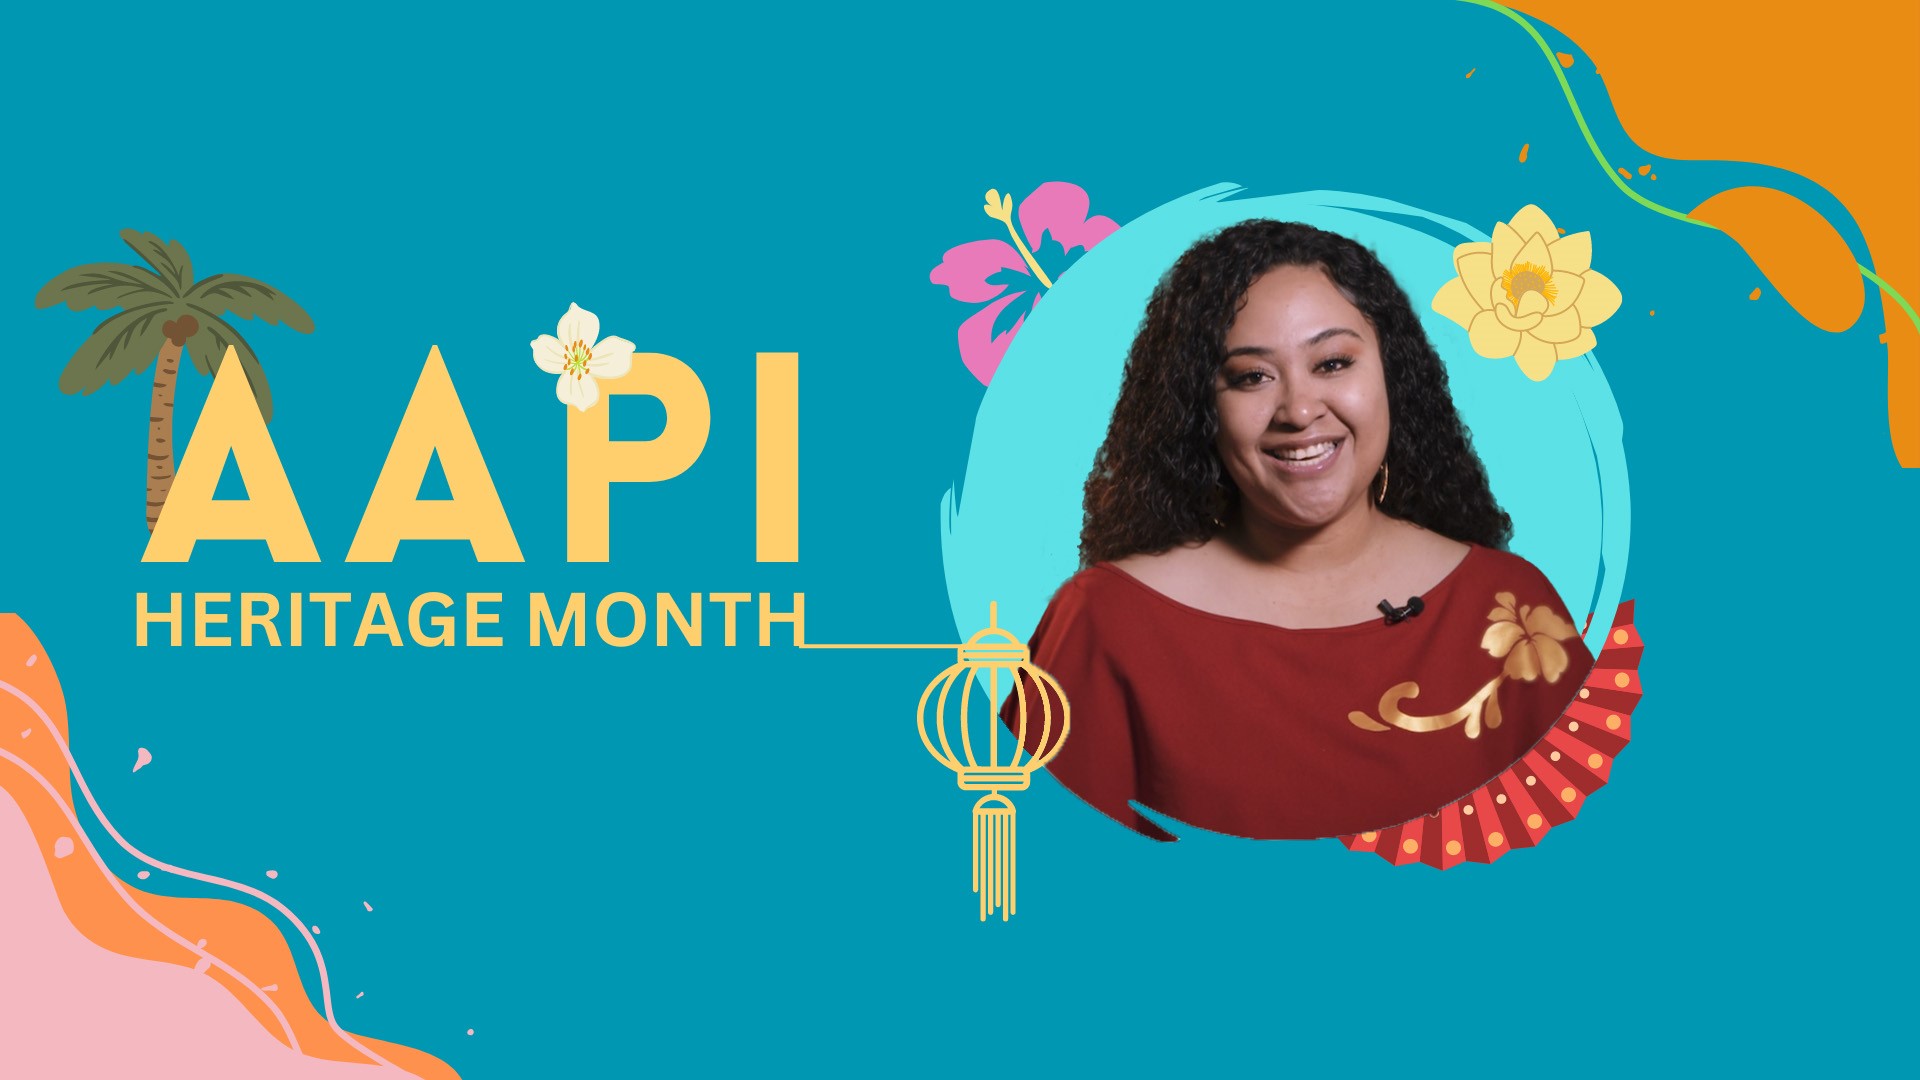 For Ana Taukolo, being Tongan means four things: building strong relationships with one God, having respect, being loyal, and staying humble.